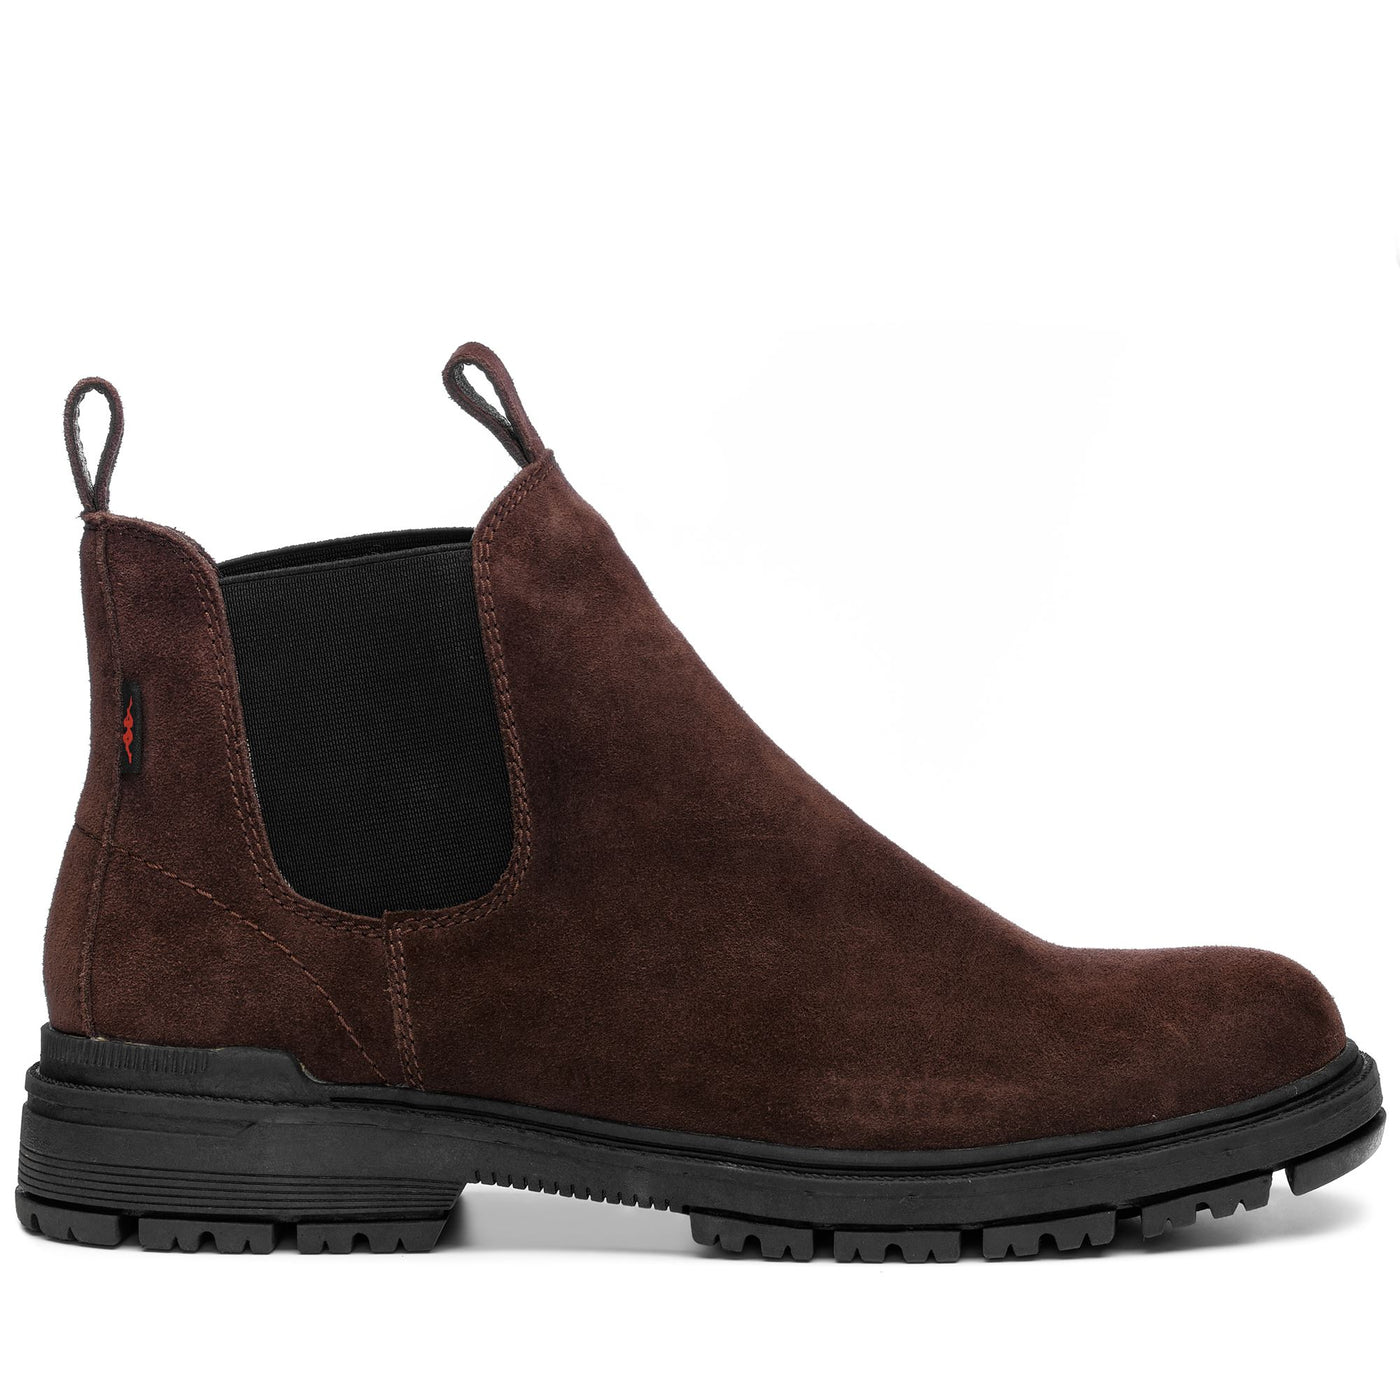 Ankle Boots Unisex DALE Beatle Brown Chocolate | robedikappa Dressed Front (jpg Rgb)	